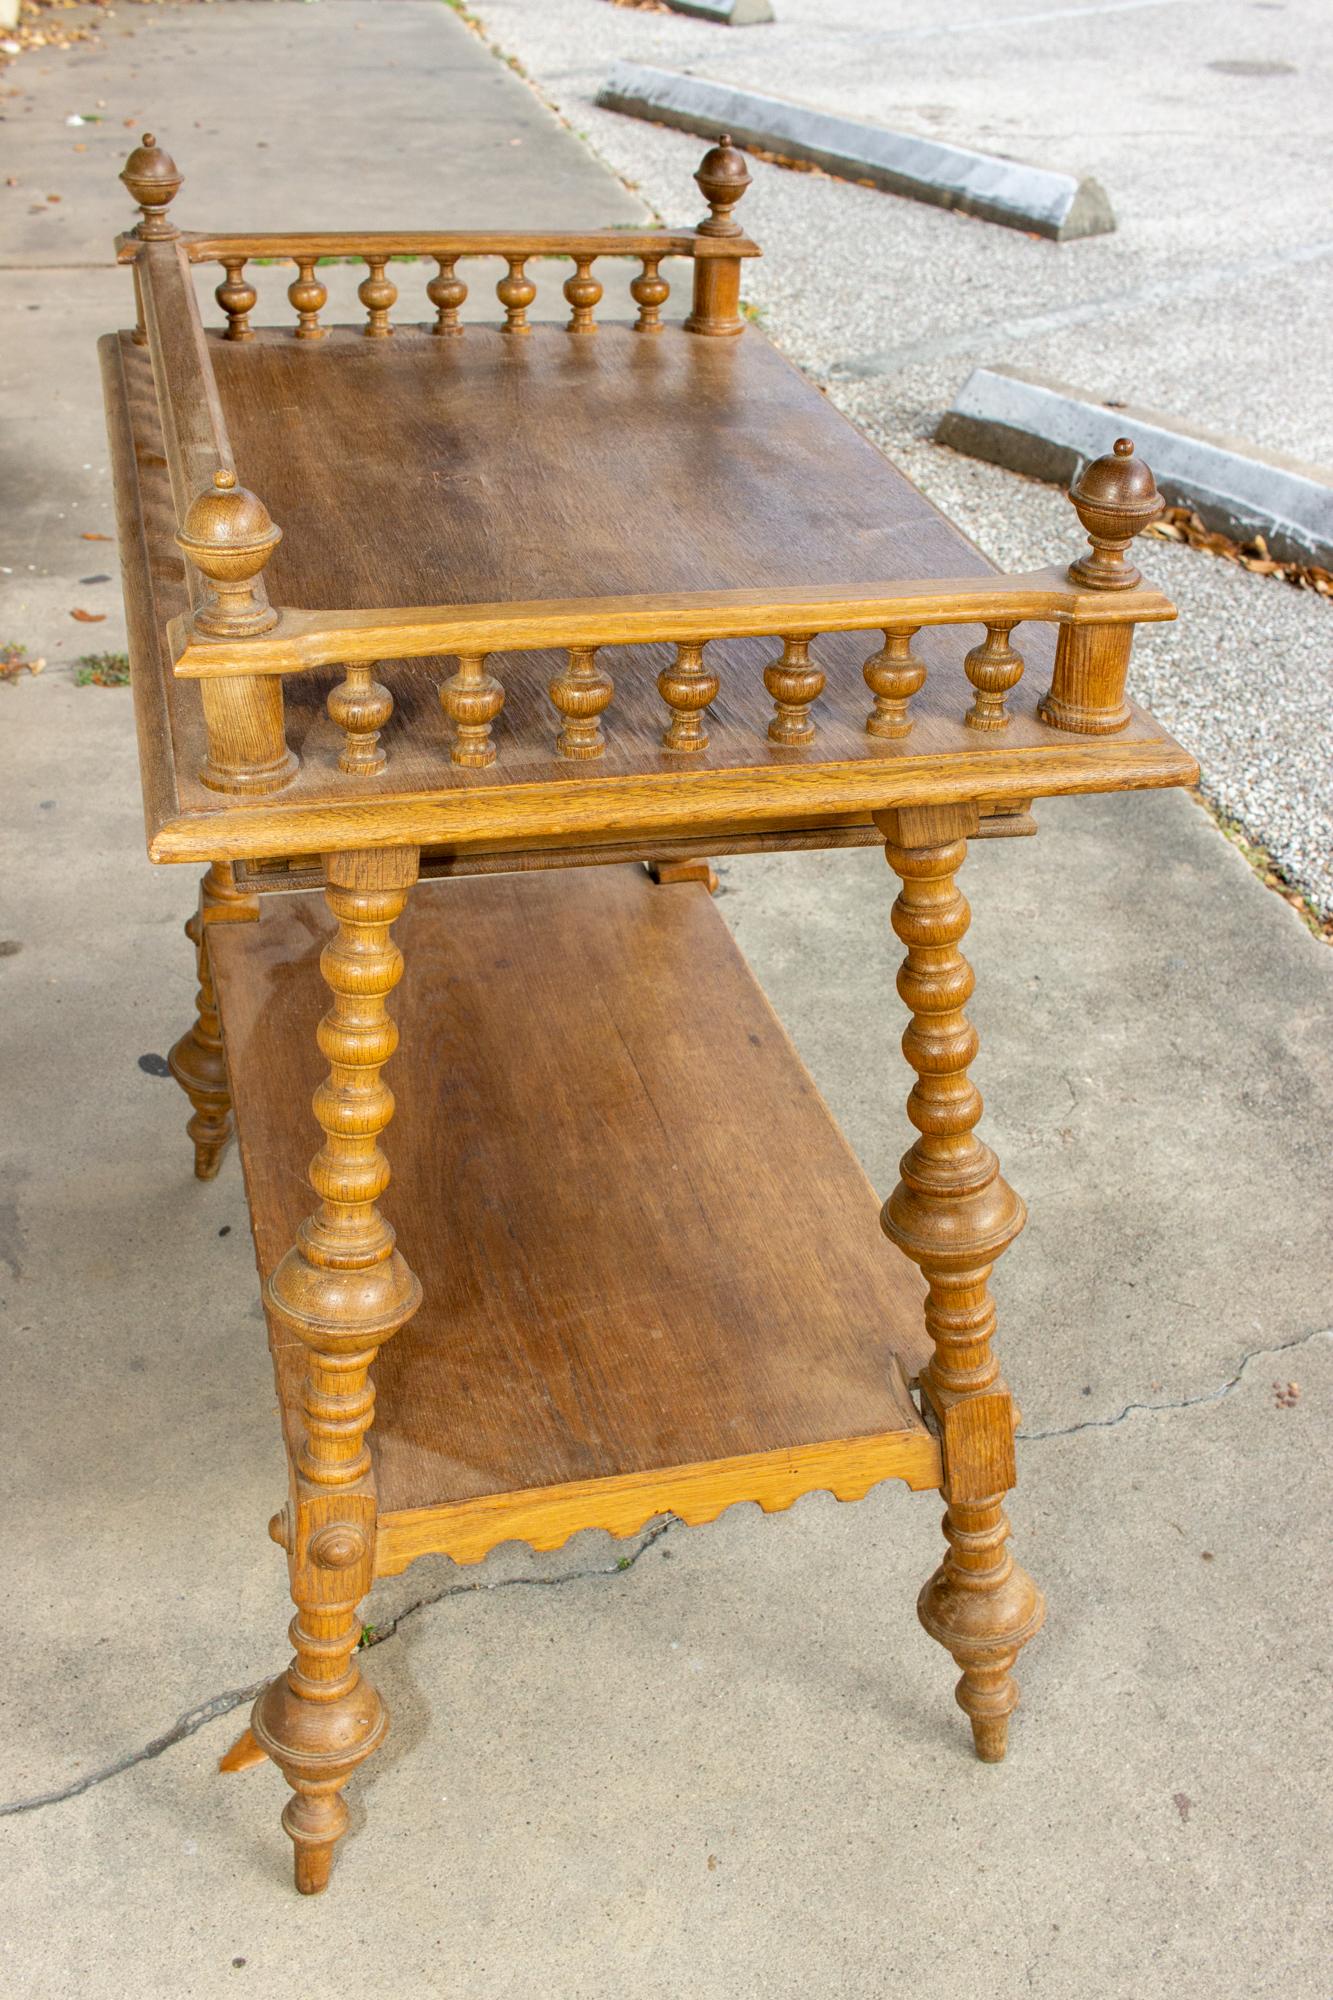 Antique French Oak Gothic Revival Spindle Leg Table with Drawer In Good Condition For Sale In Houston, TX